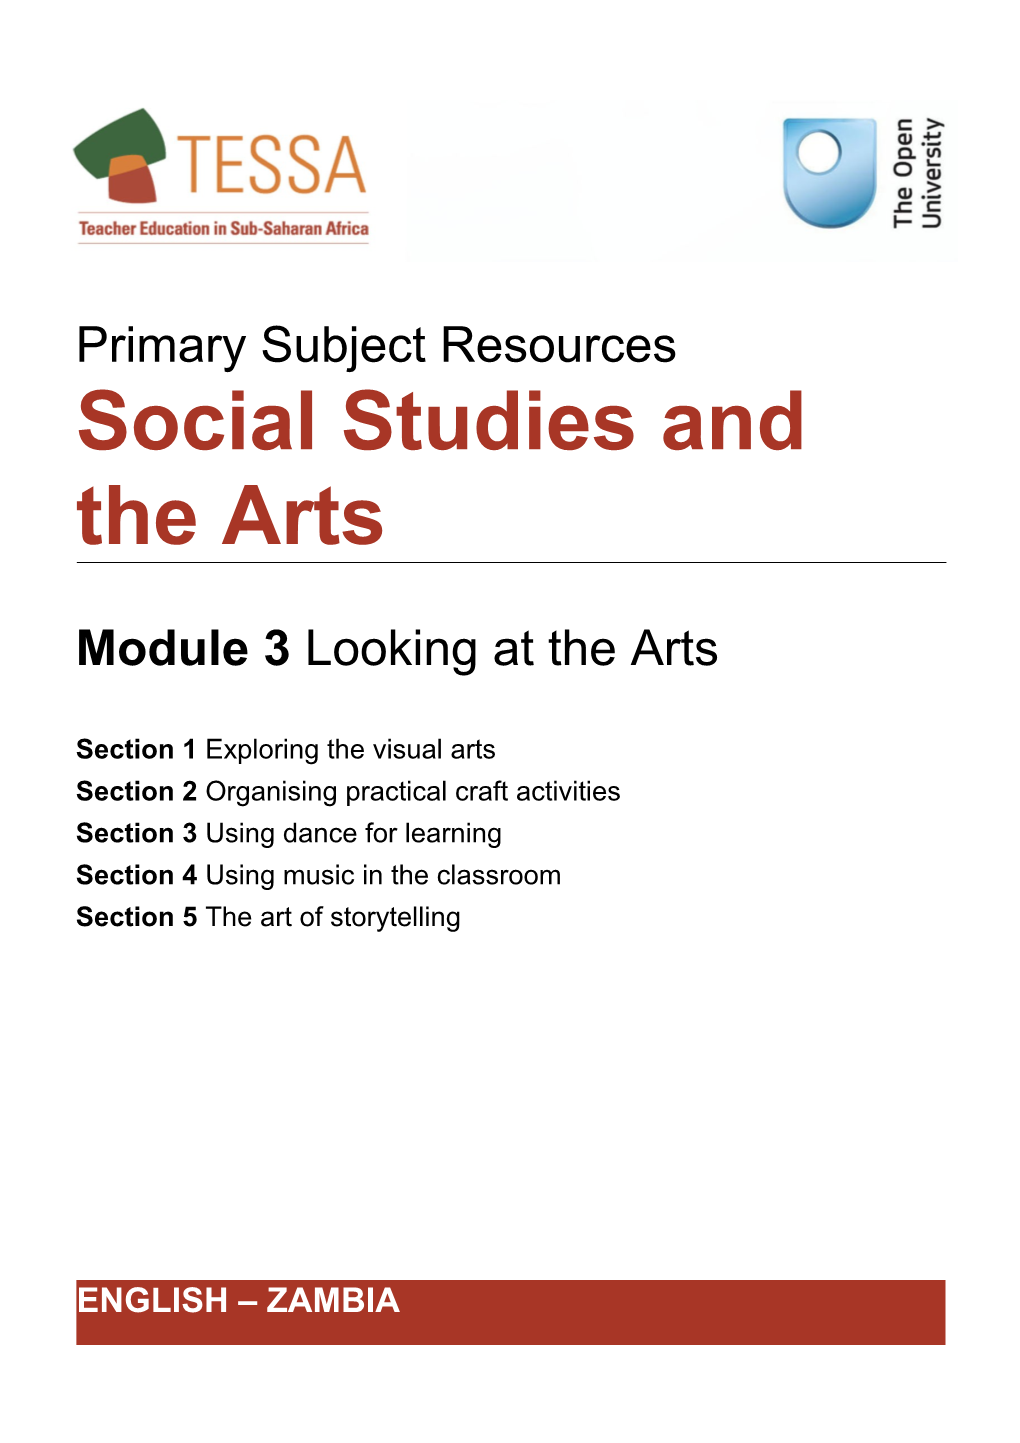 Module 3: Looking at the Arts s1